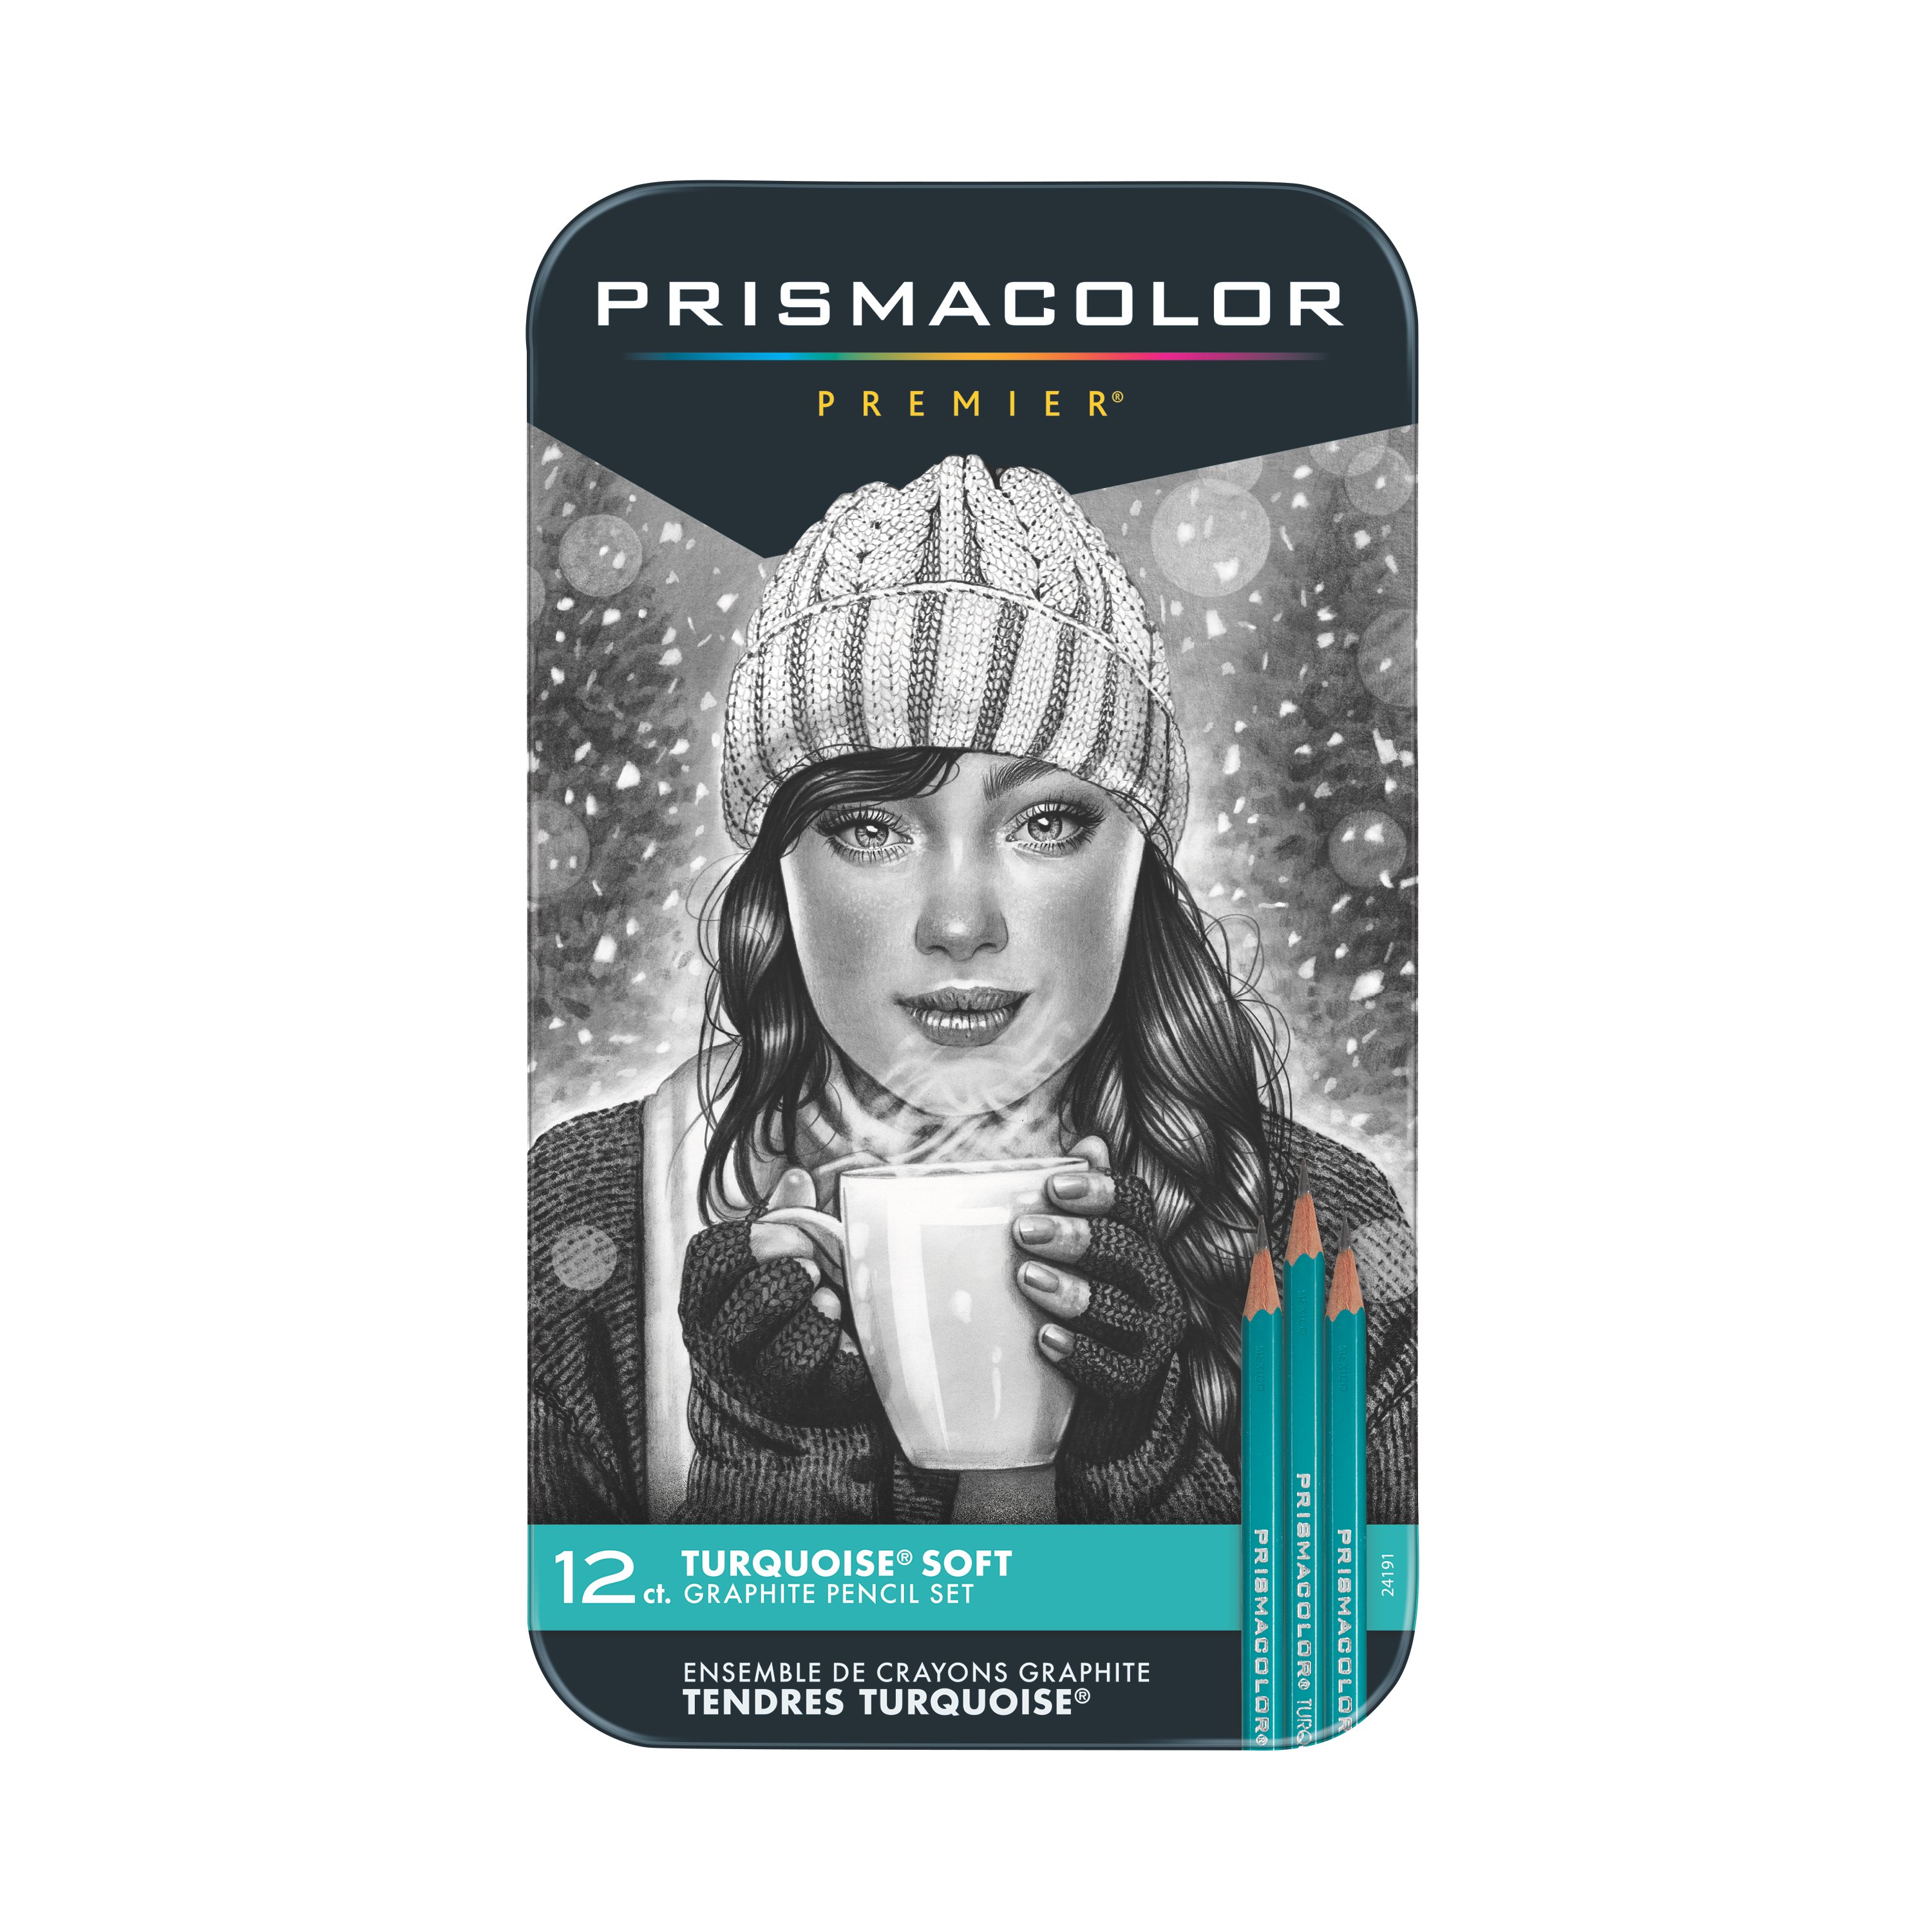 https://s7d9.scene7.com/is/image/NewellRubbermaid/24191-wace-prismacolor-turquoise-soft-graphite-pencil-set-12ct-in-pack-1-1